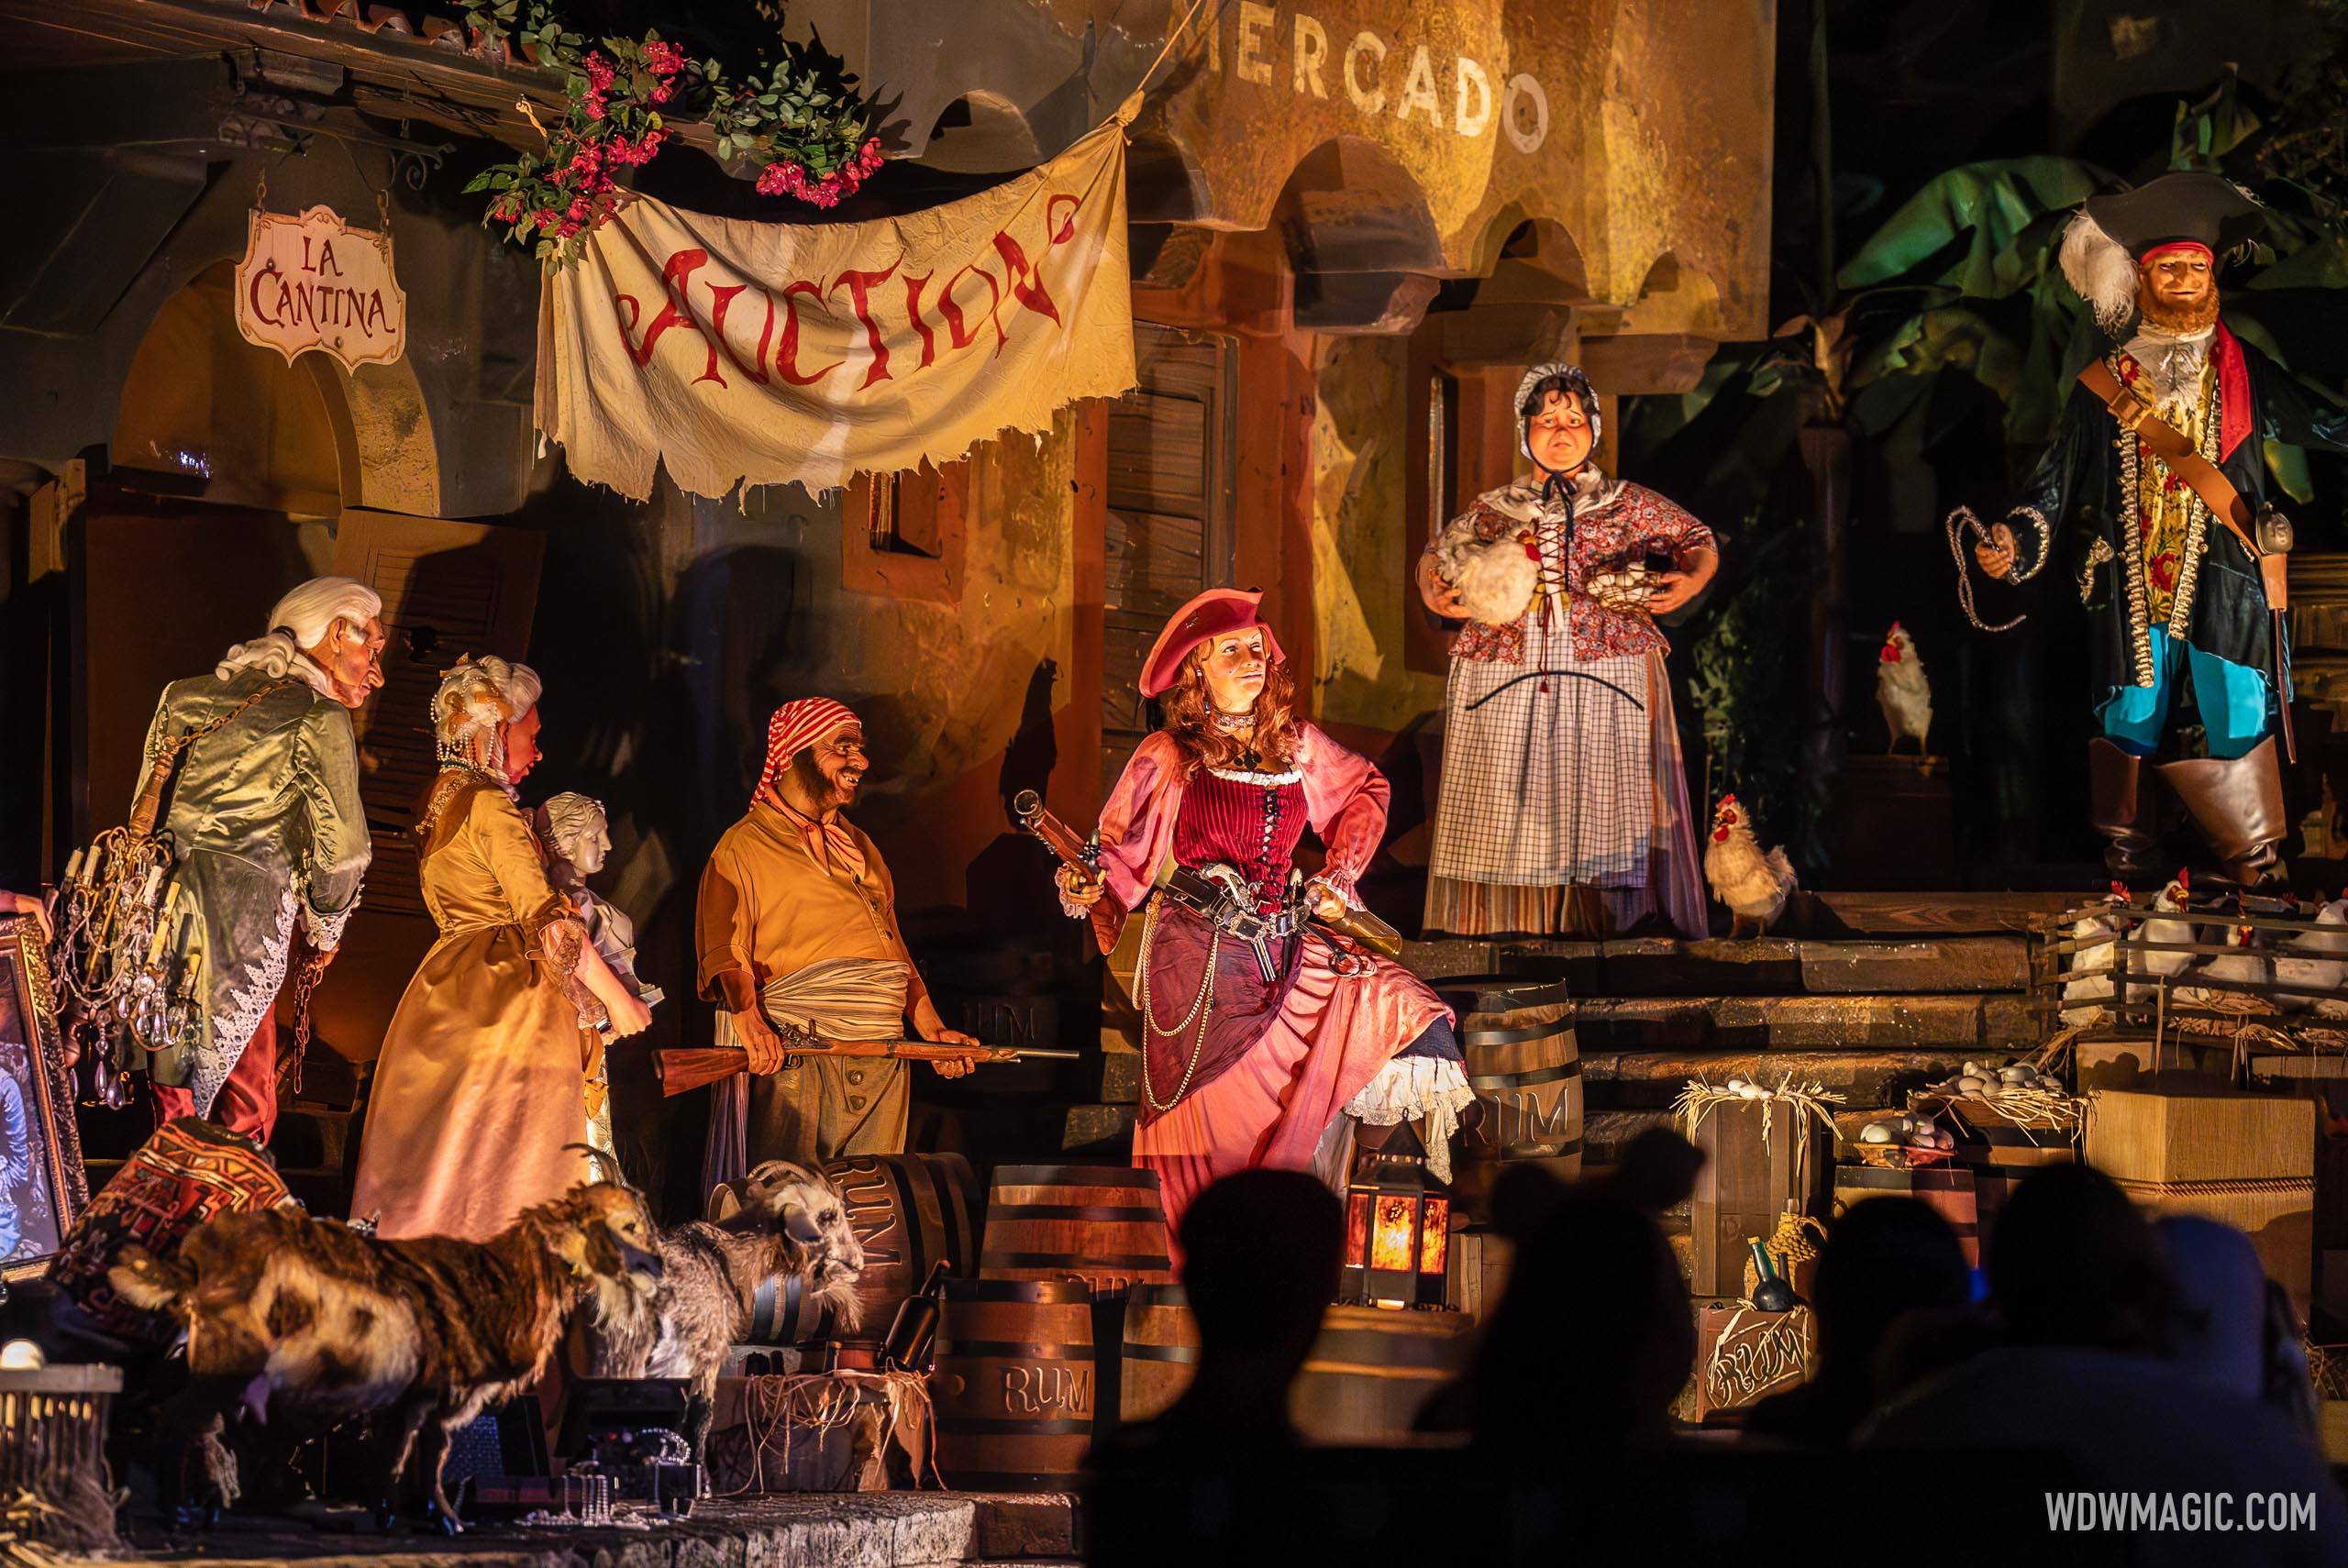 Pirates of the Caribbean closing for a day later this month